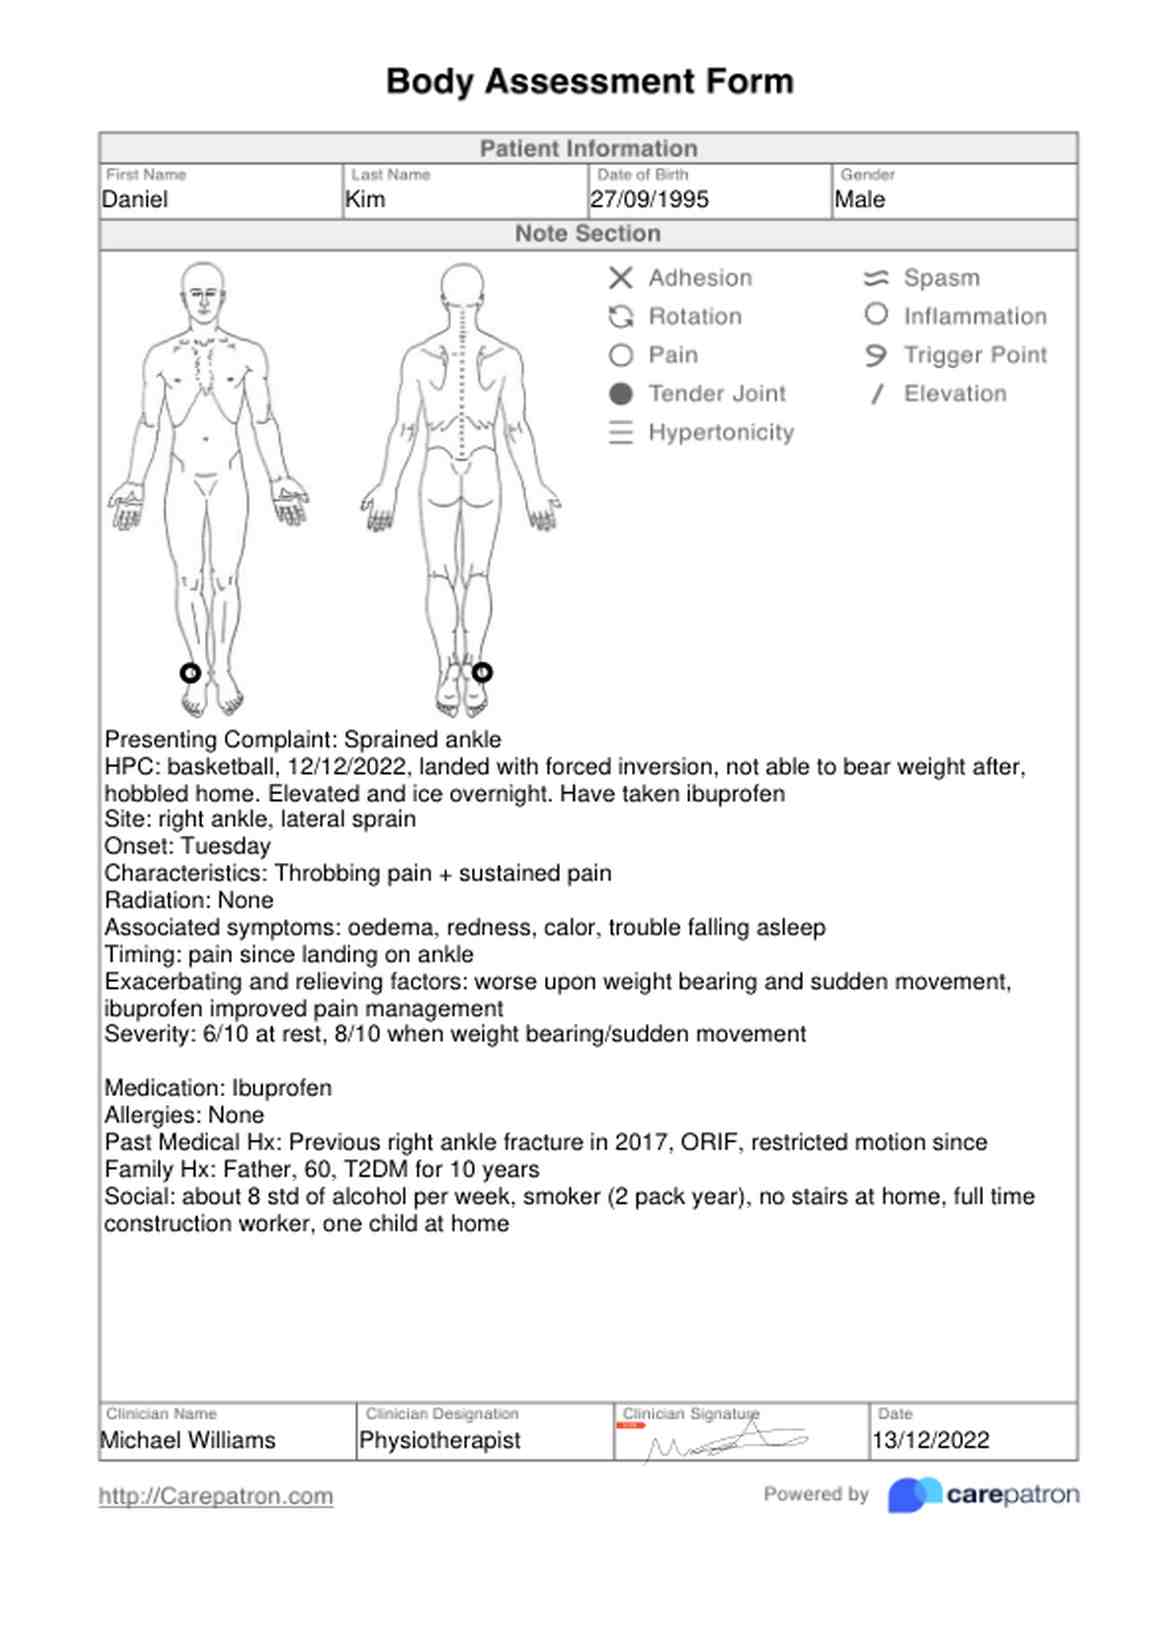 Body Assessment Form PDF Example